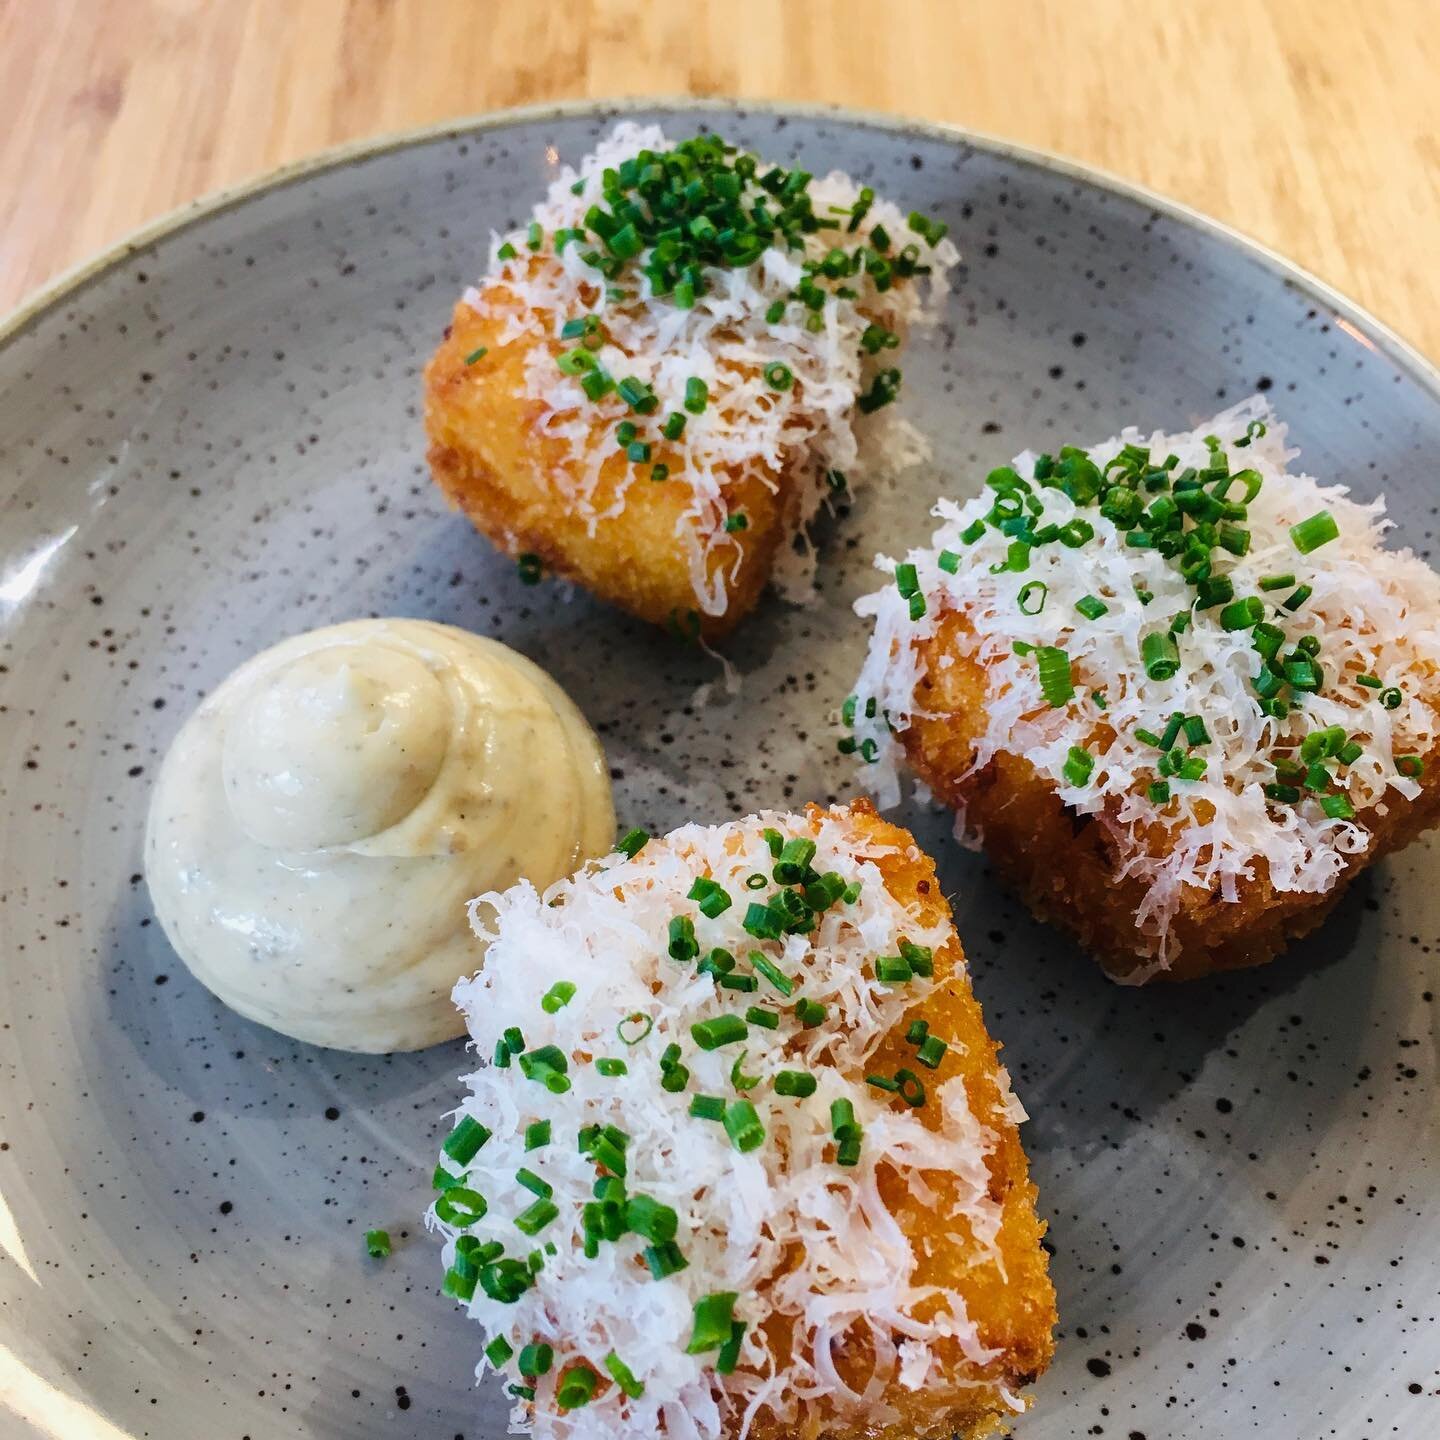 Mac and cheese bites......a firm favourite 
#abergeavenny#loveit #restaurant #hospitality #dindins